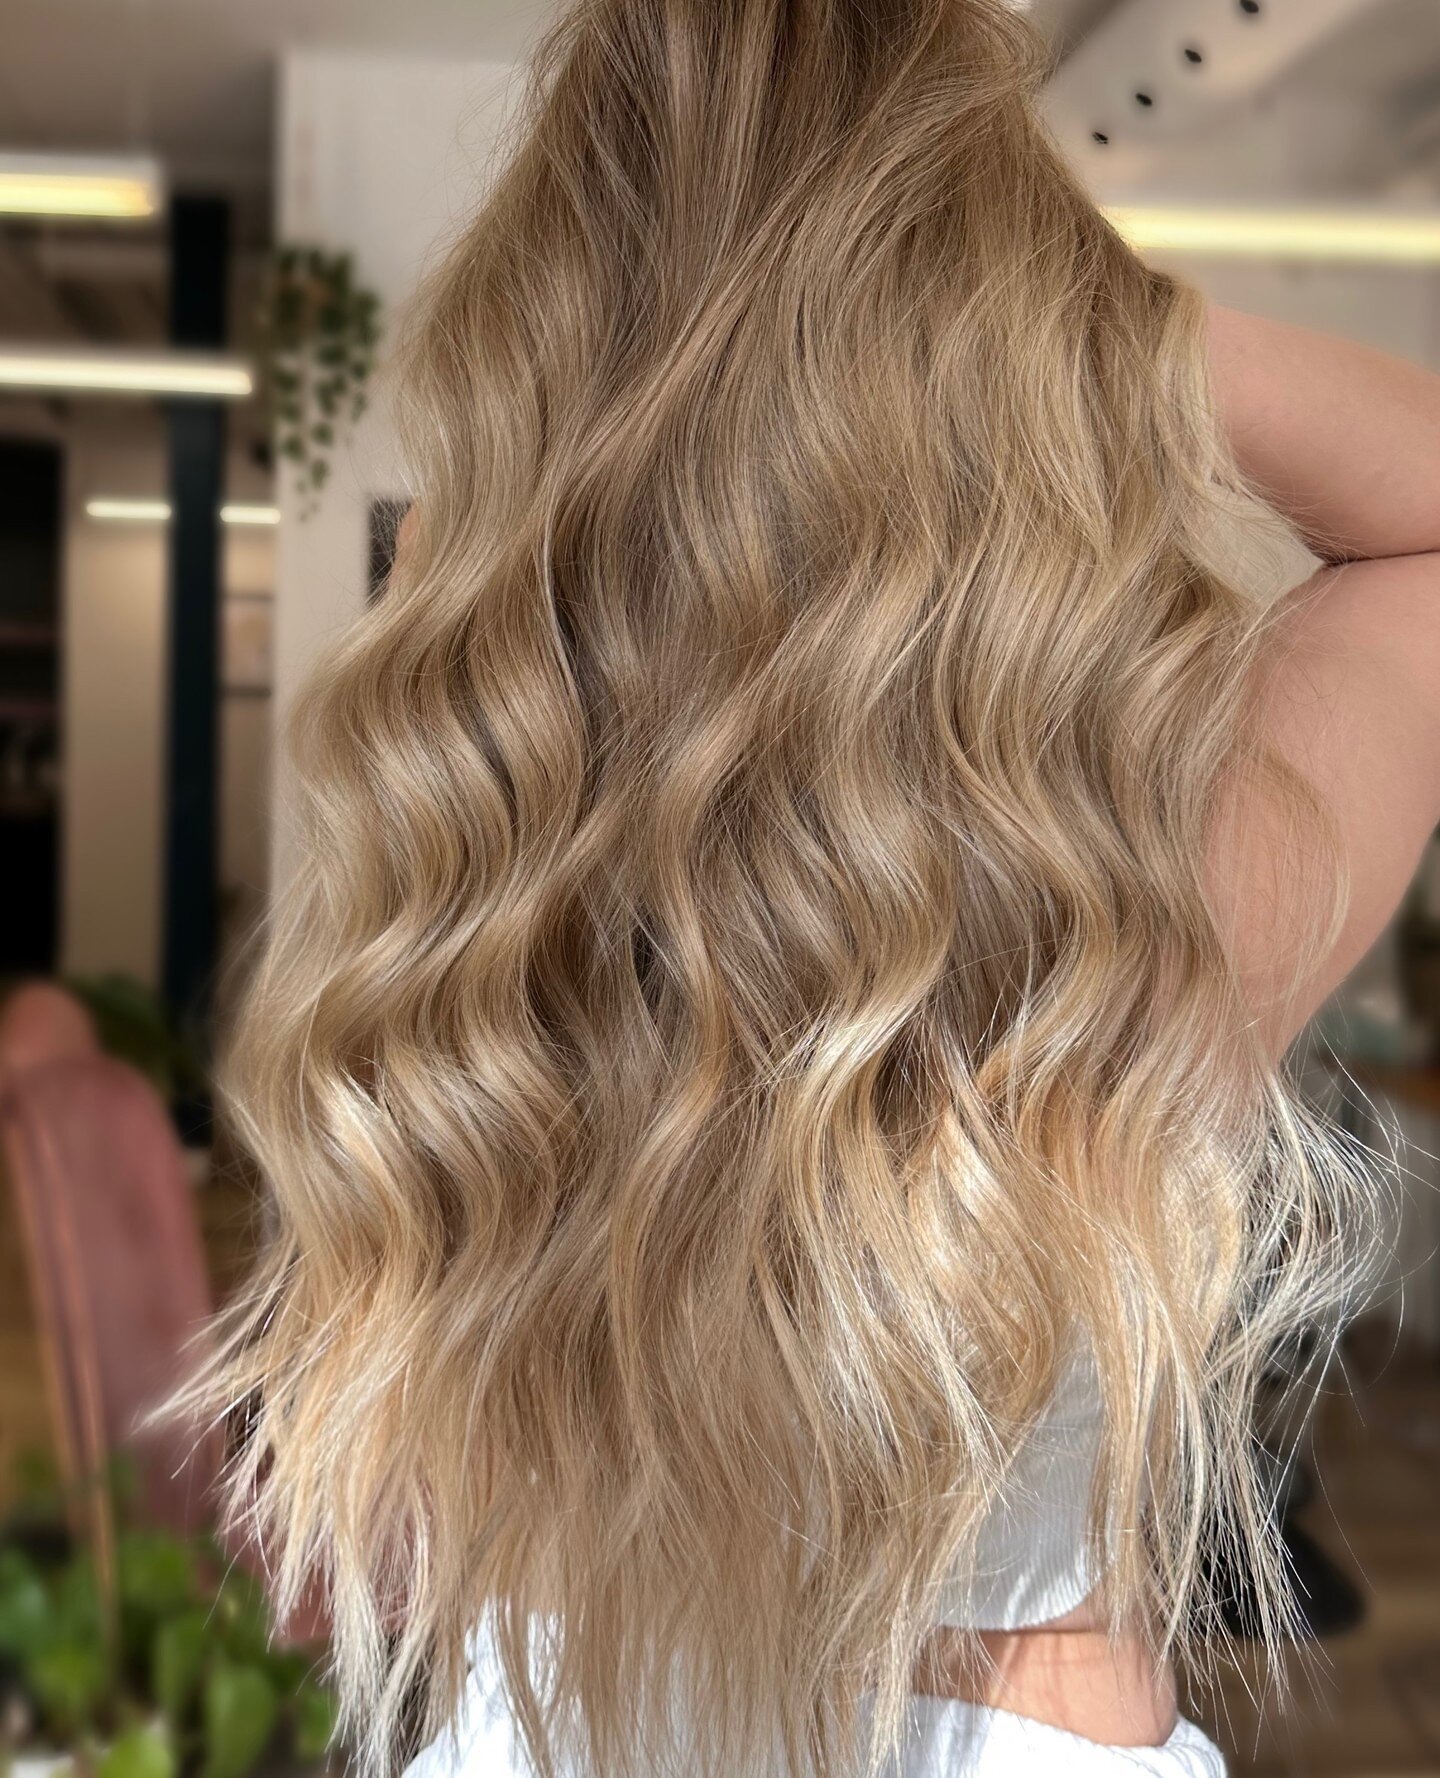 Getting Summer ready with these gorgeous locks ✨⁠
⁠
We're booking into June and July for all your cut and colour needs ☀️